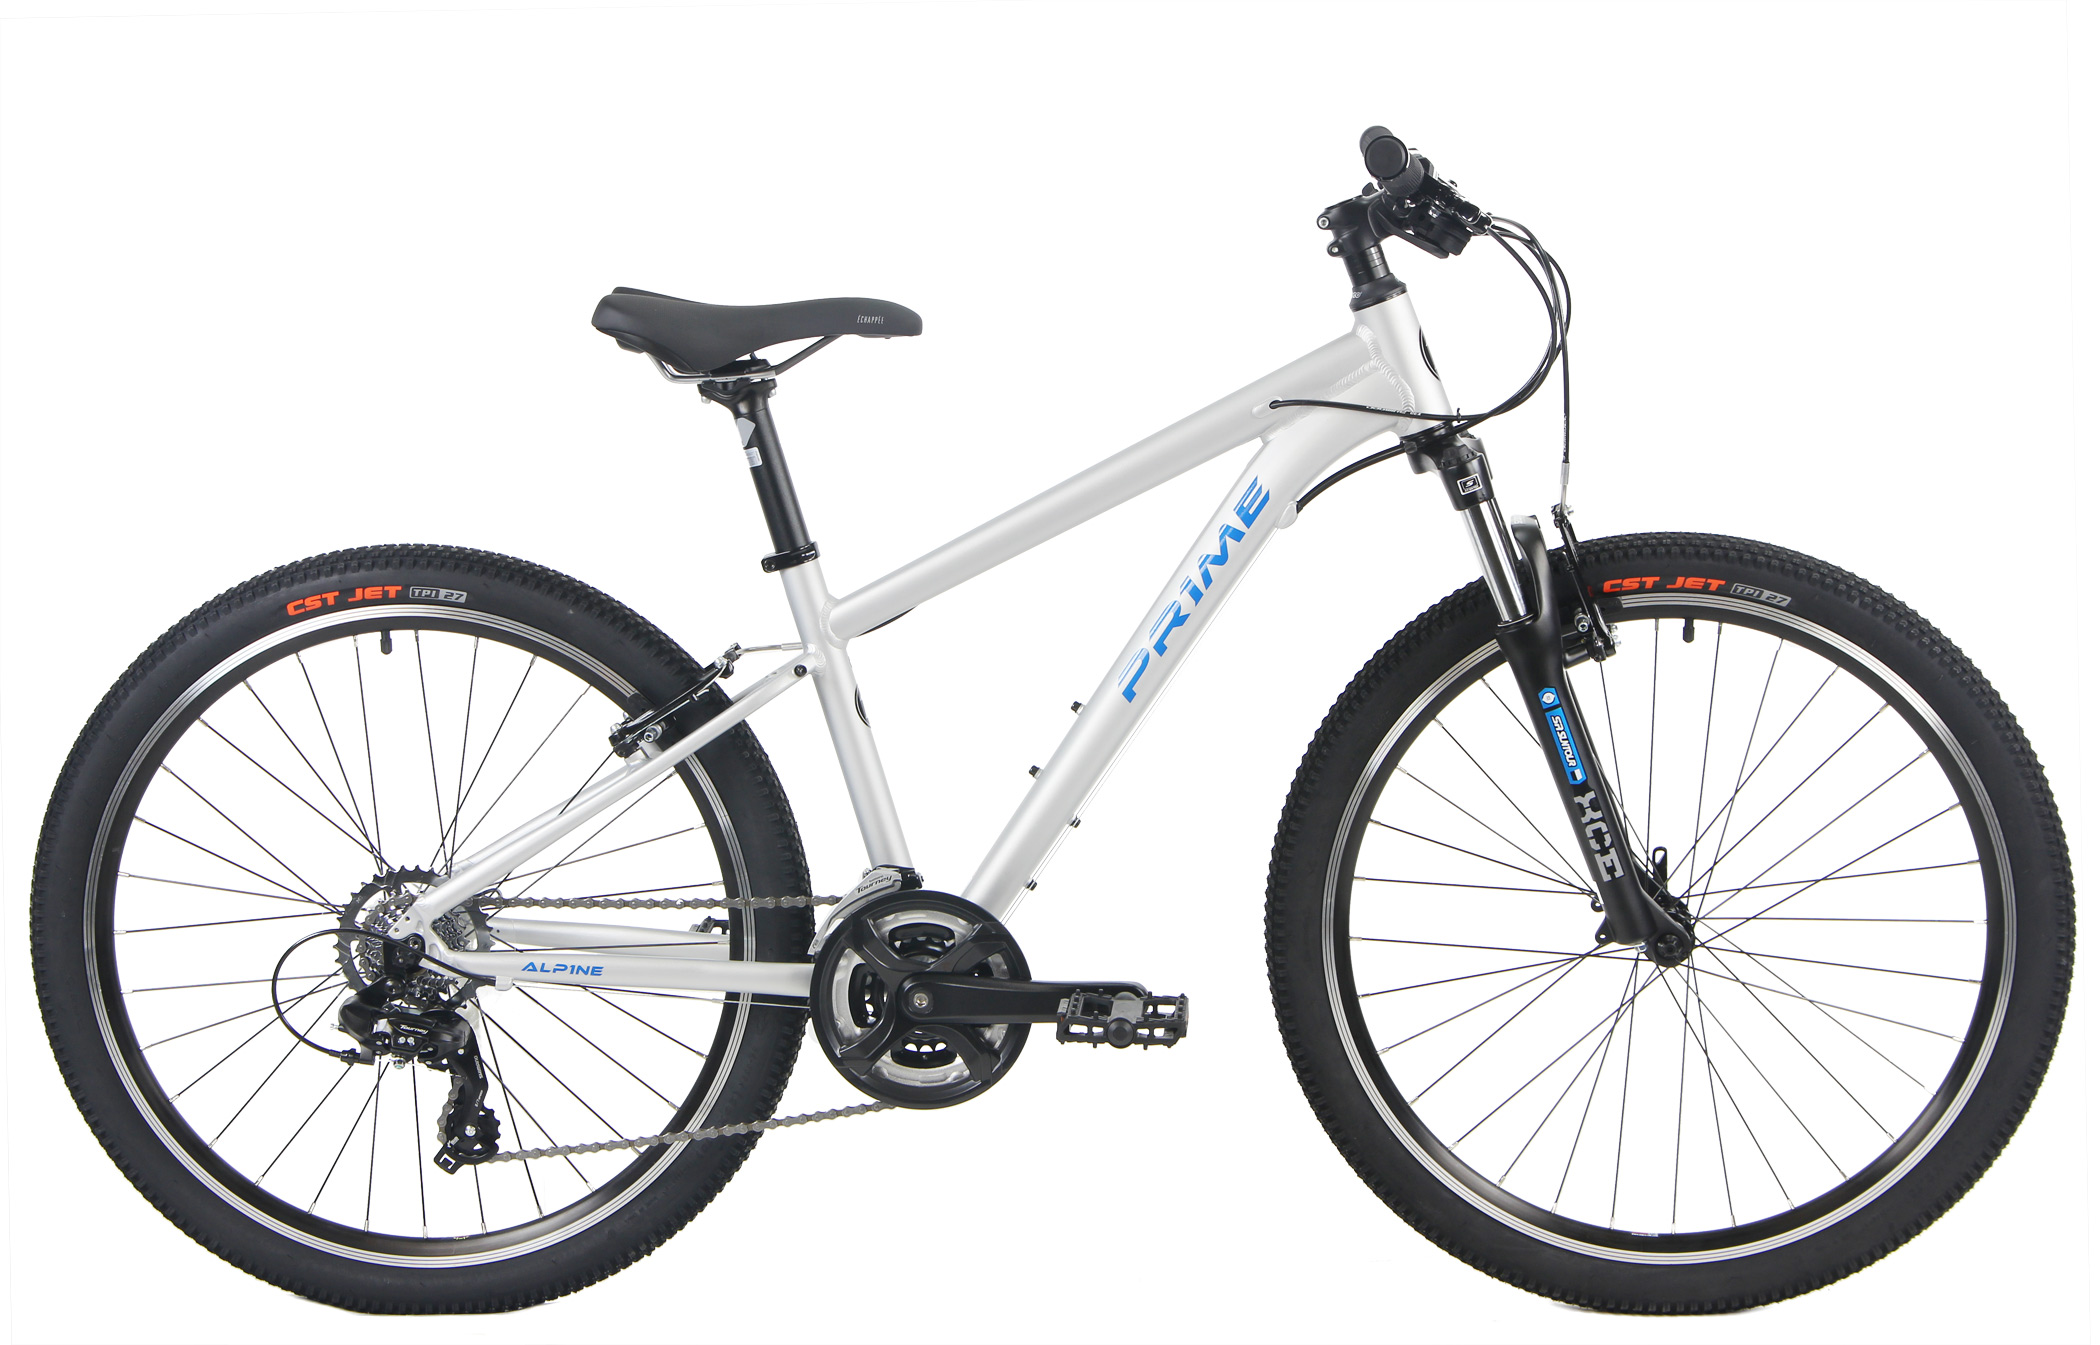 Save Up to 60% Off Bike Shop Quality Mountain Bikes by PRIME Bicycles Co.